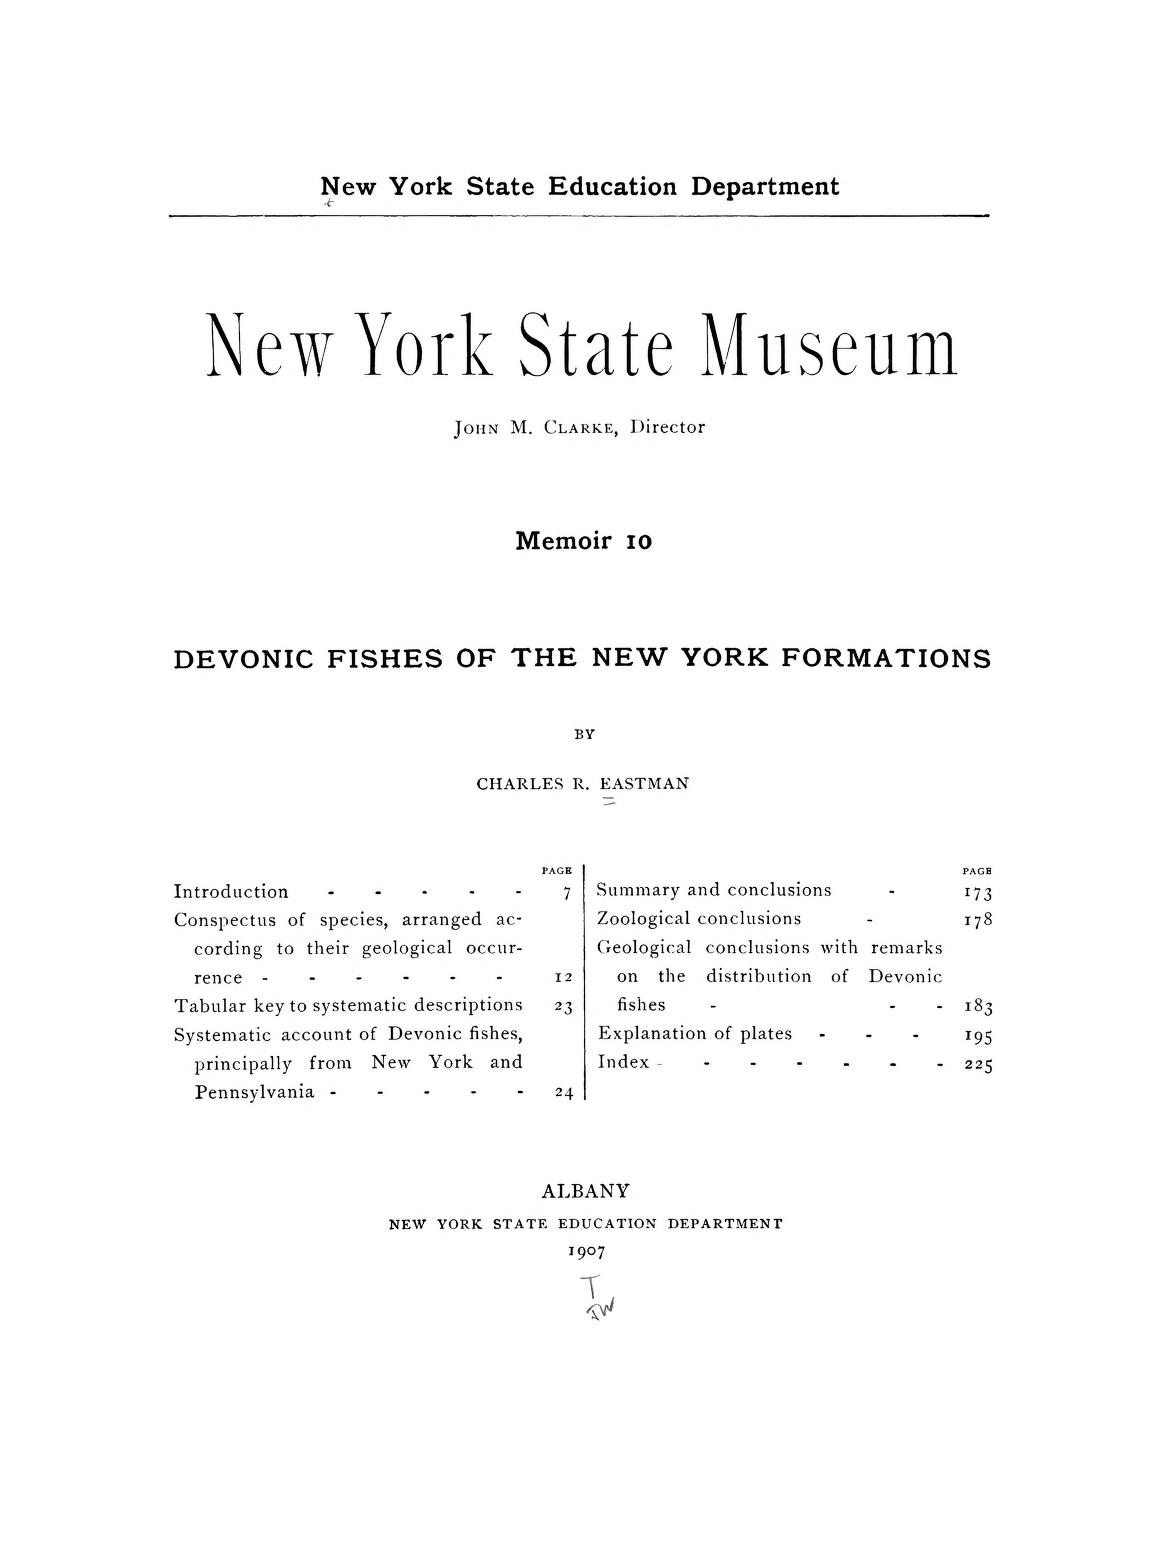 Media type: text, Eastman 1907. Description: Devonic fishes of the New York formation